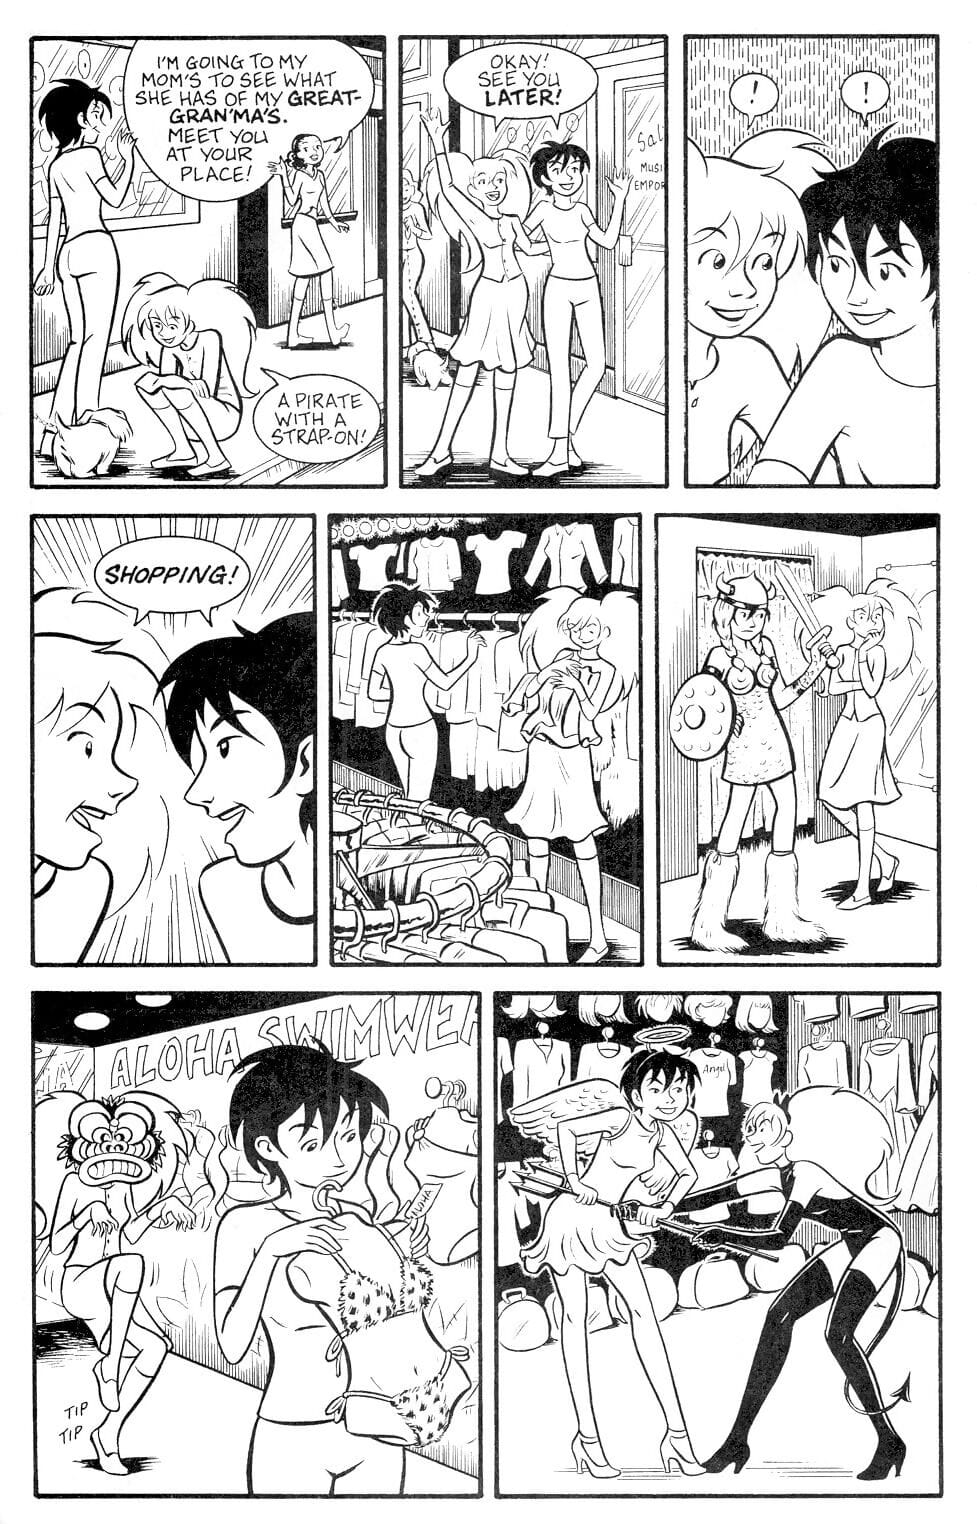 Small Favors Issue #6 ENG page 1